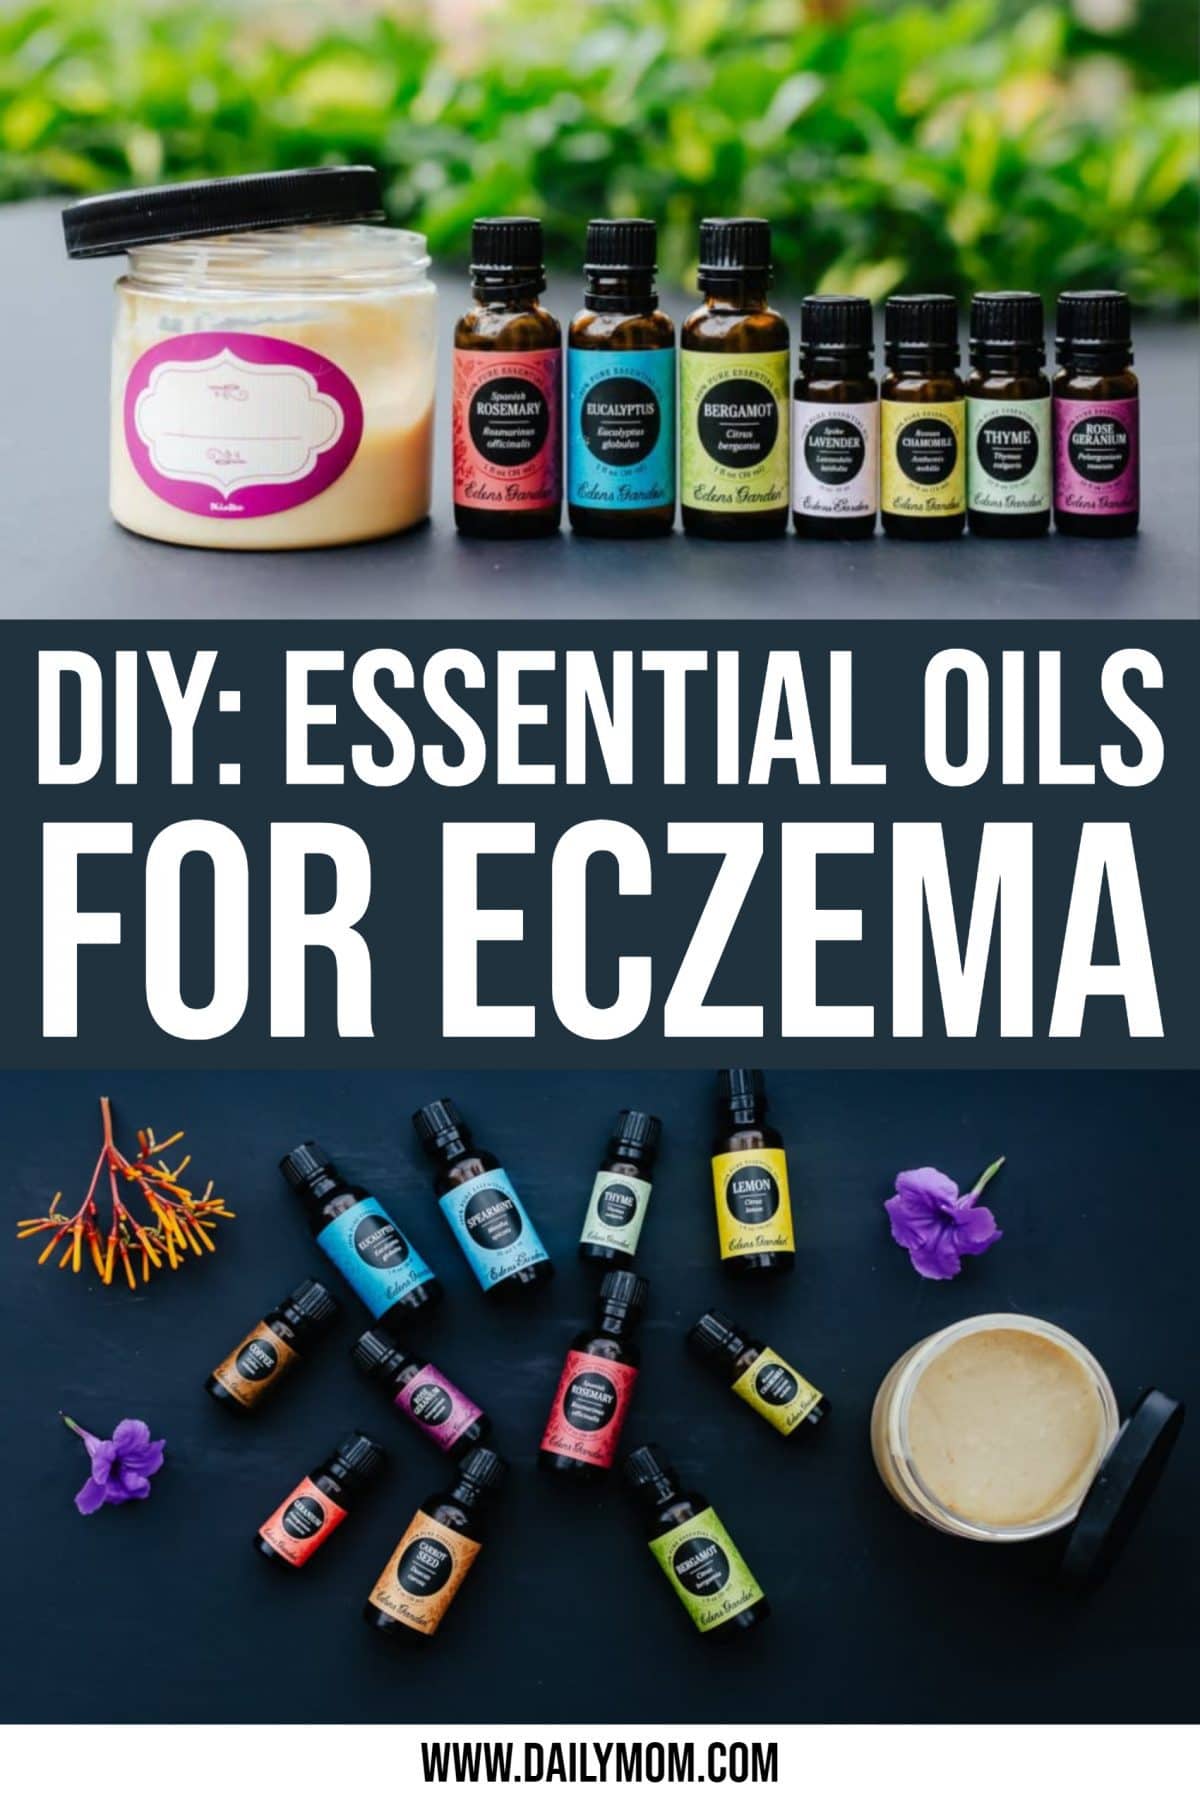 Essential Oils For Eczema: Why And How To Use Them